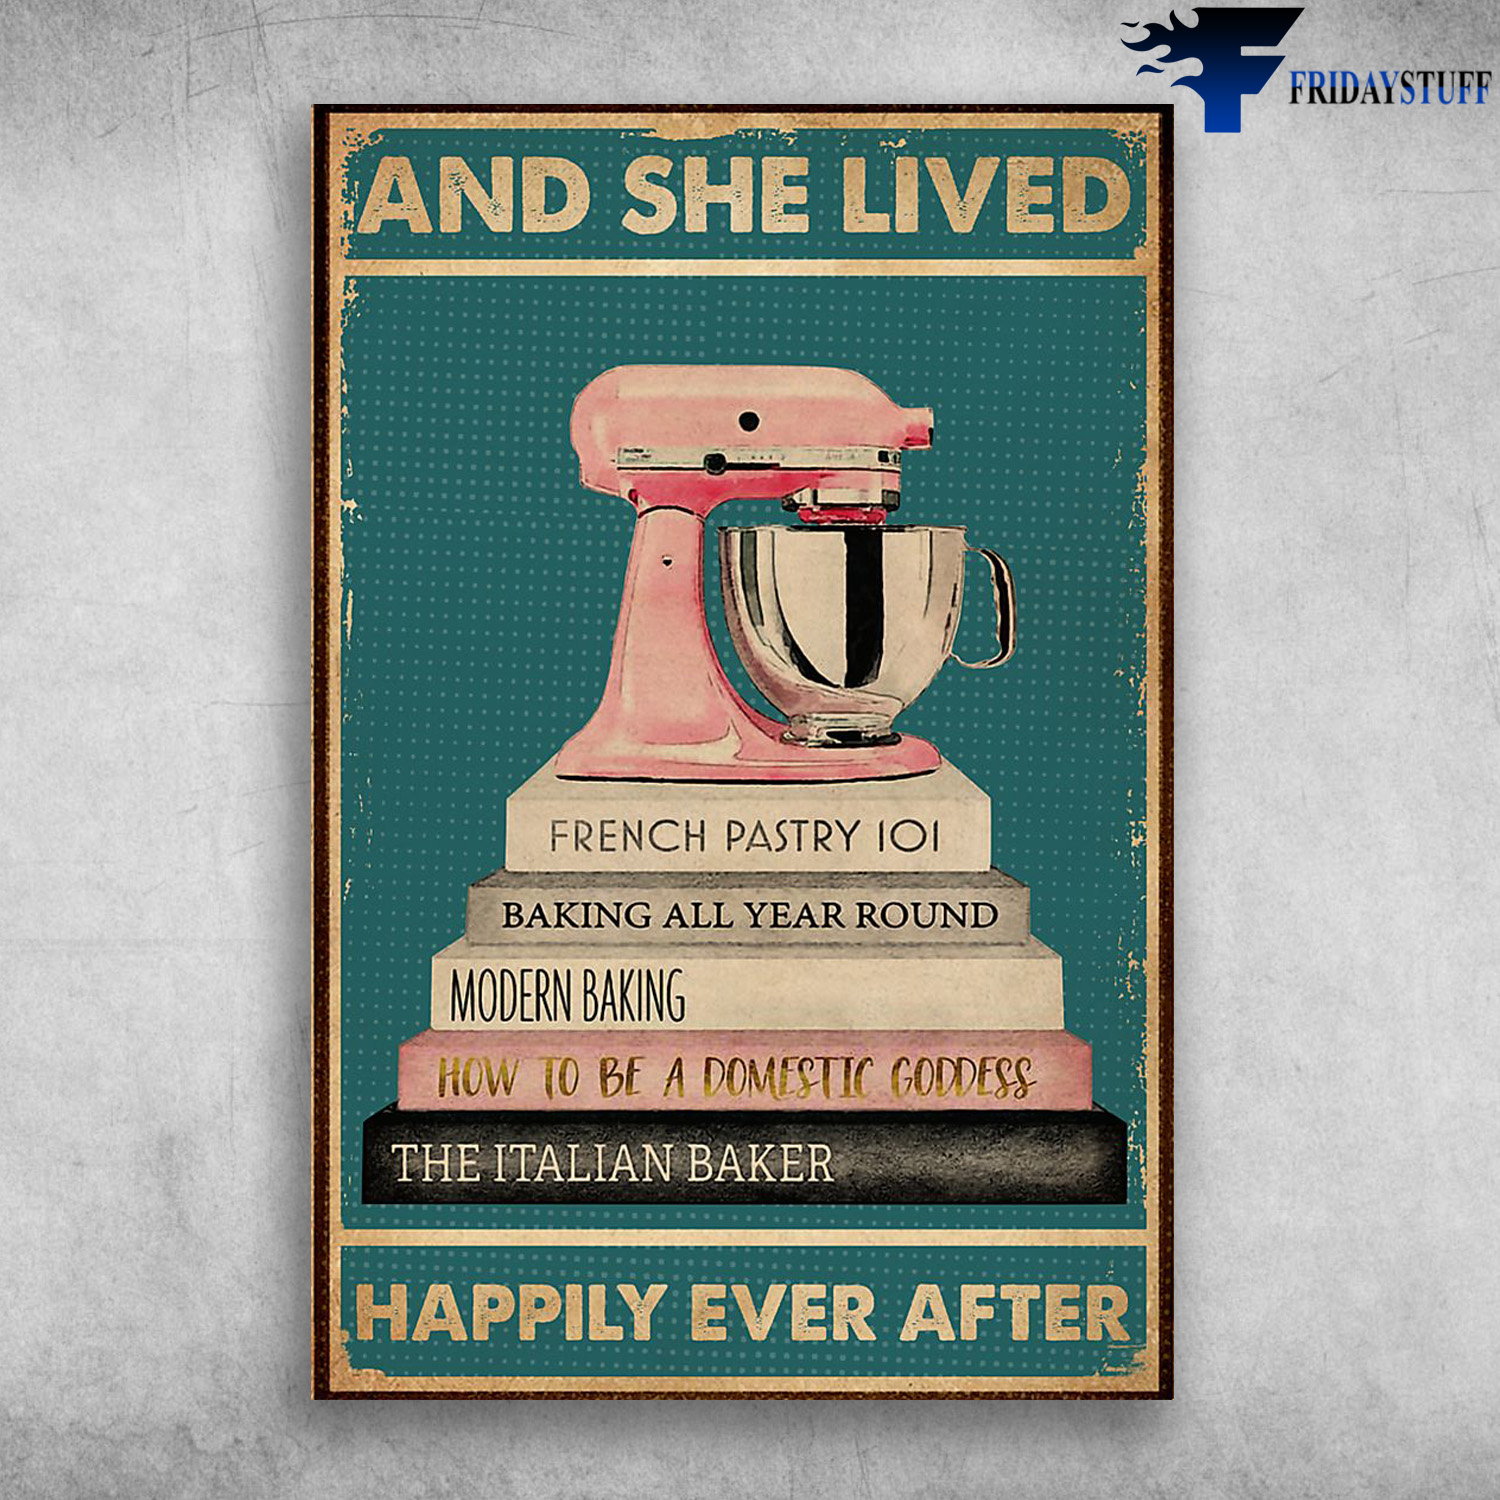 And She Lived Happily Ever After - Beaters and Books